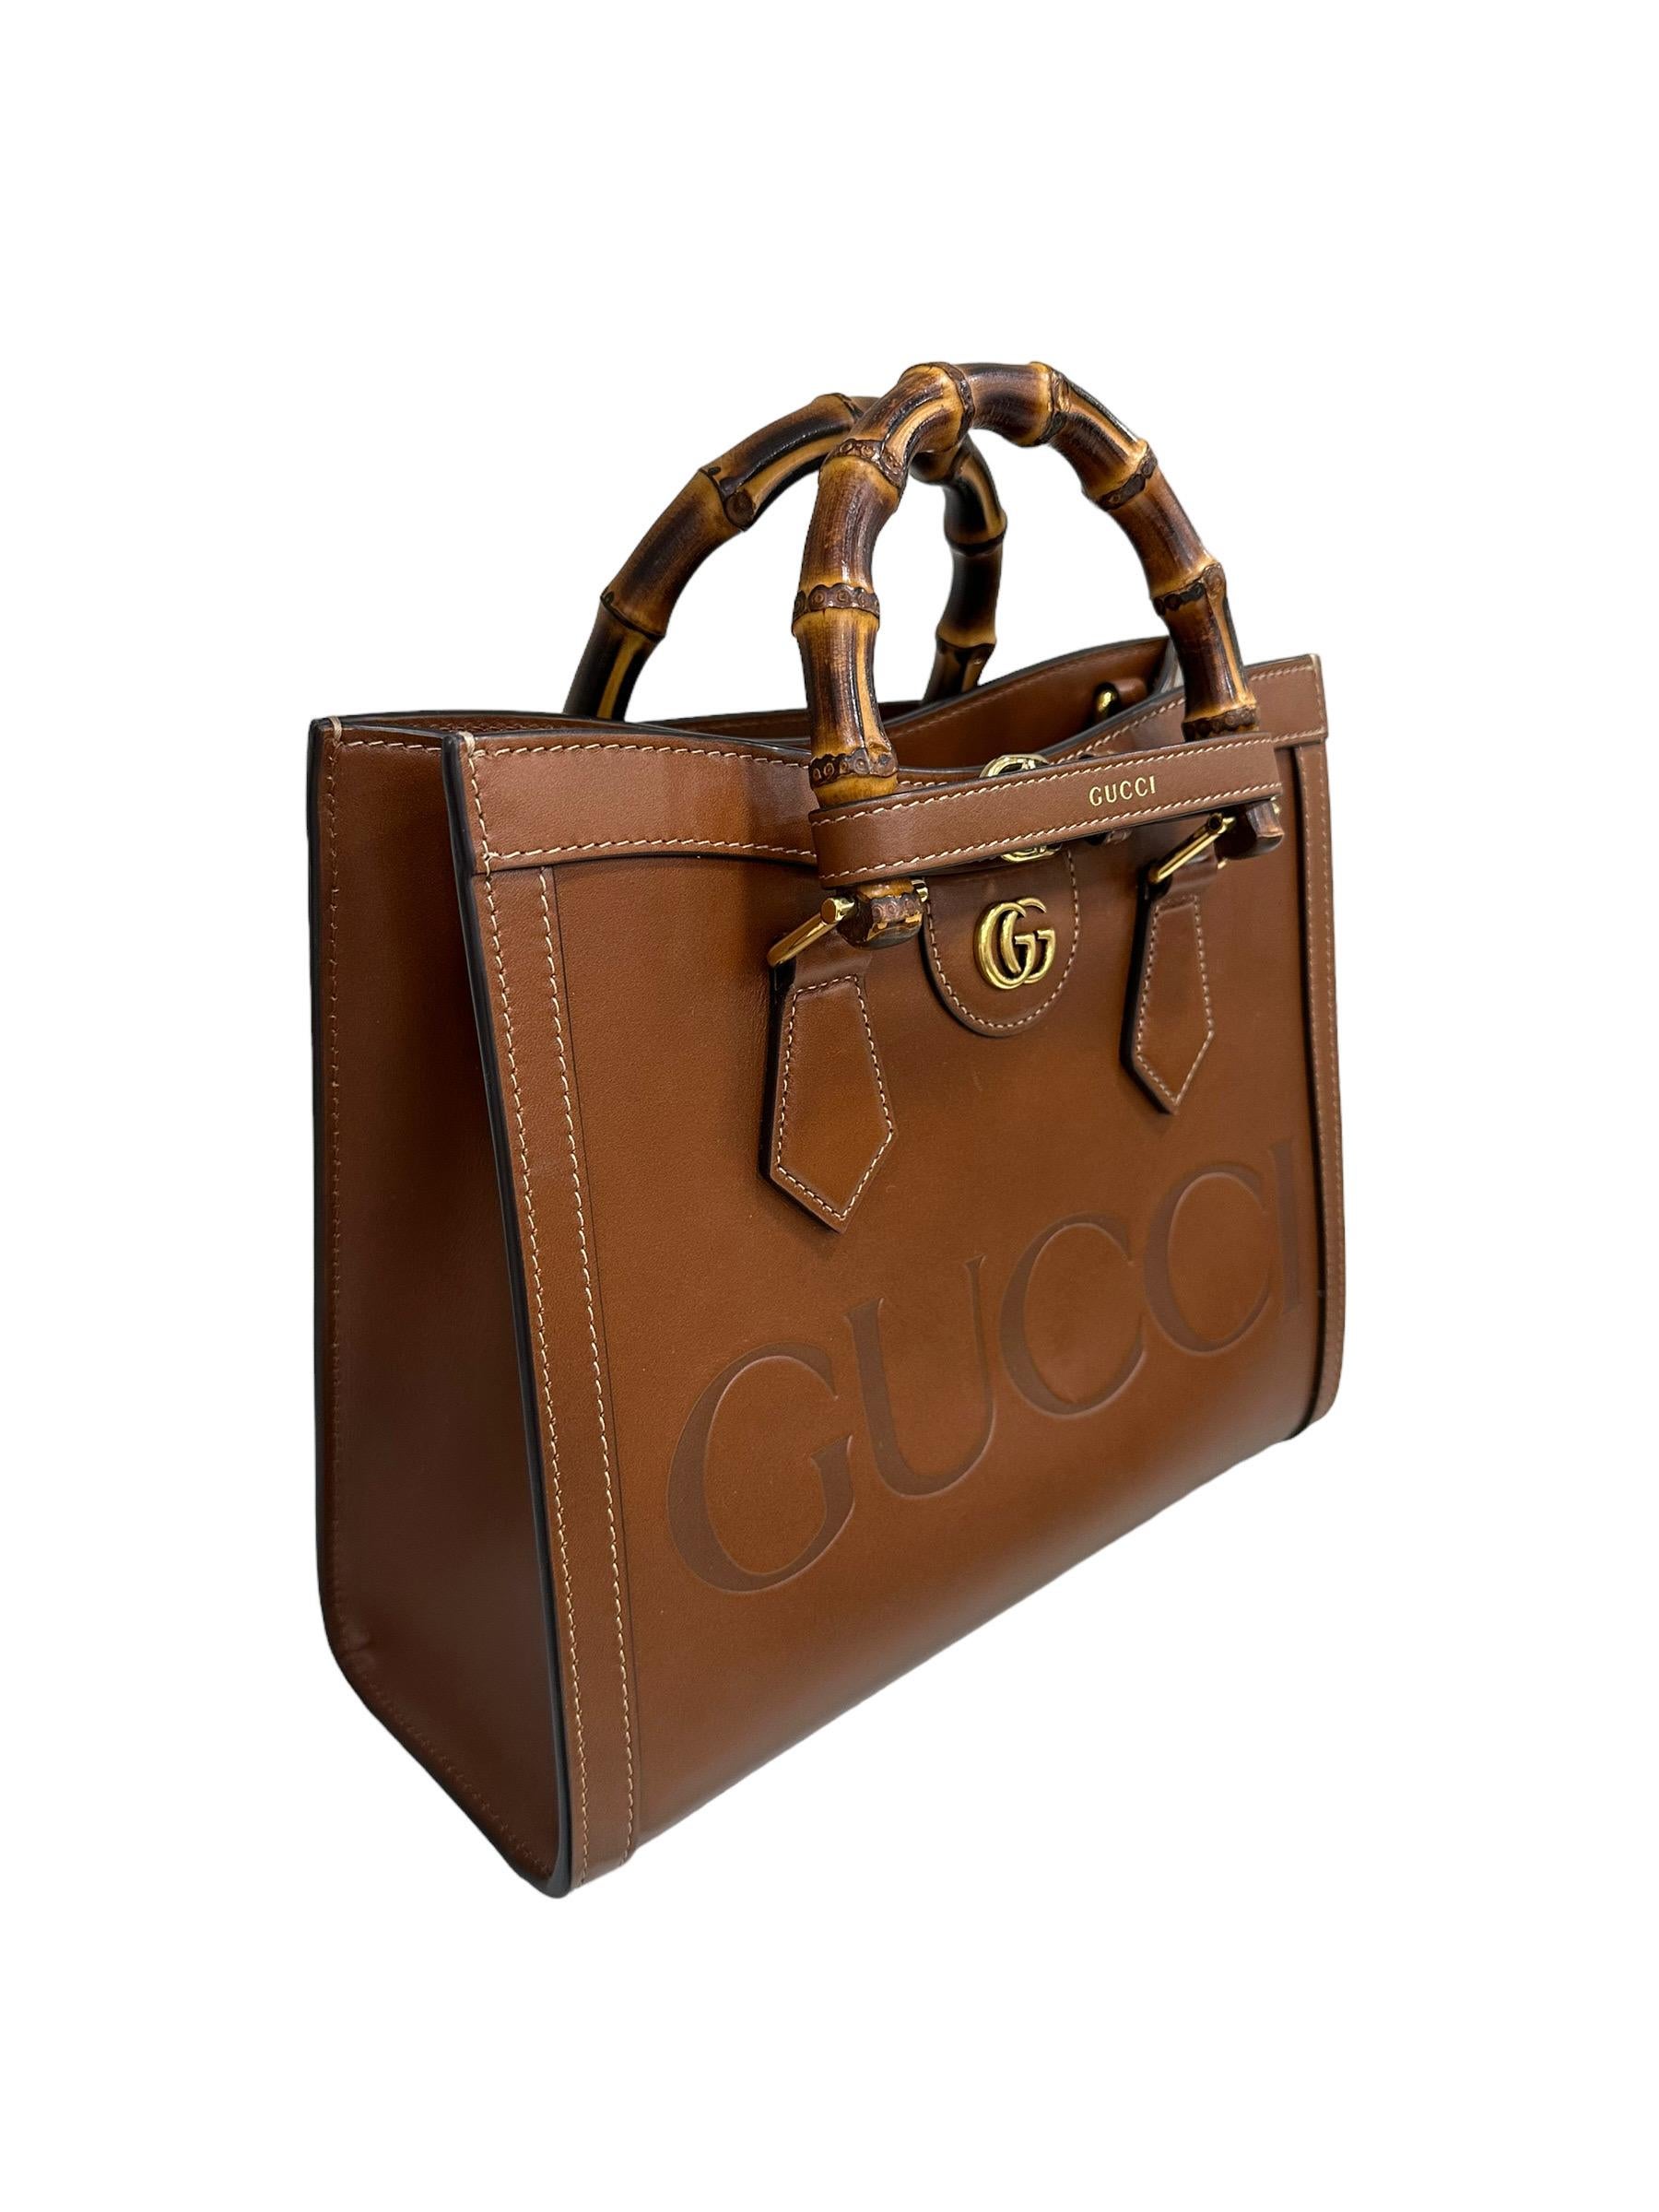 Gucci bag, Diana model, small size, made of tan leather, with embossed 